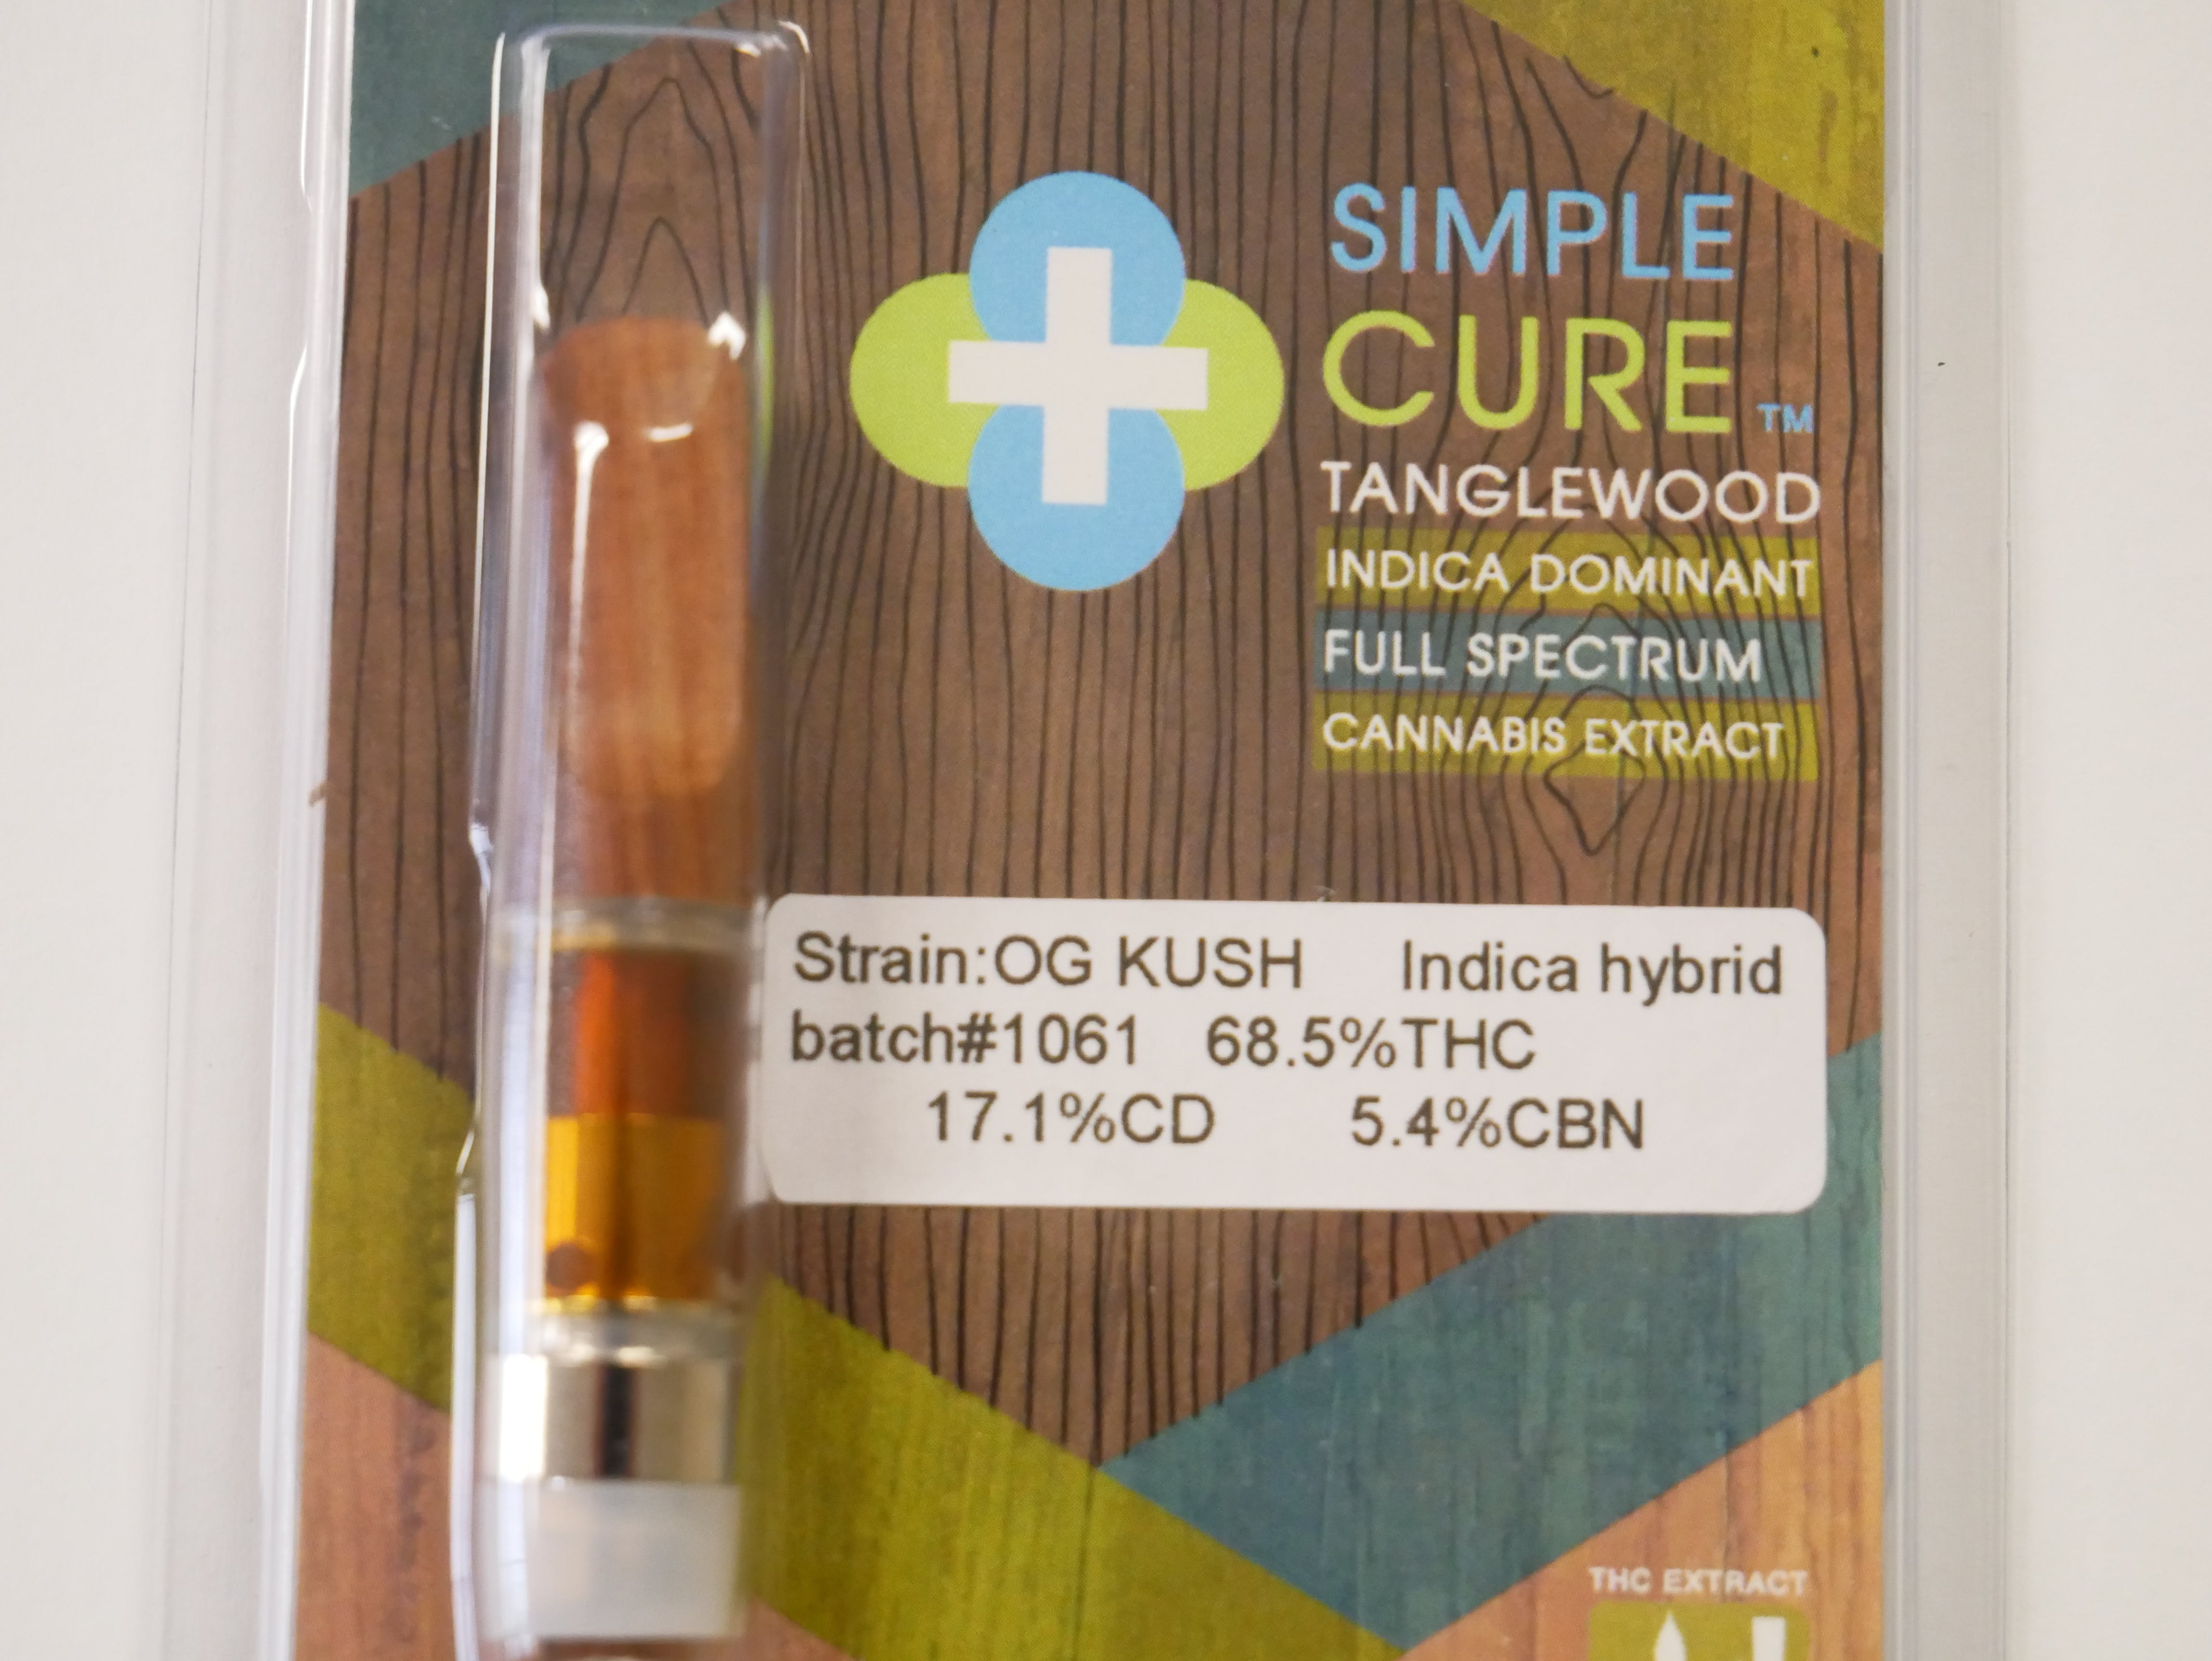 concentrate-simple-cure-500mg-og-kush